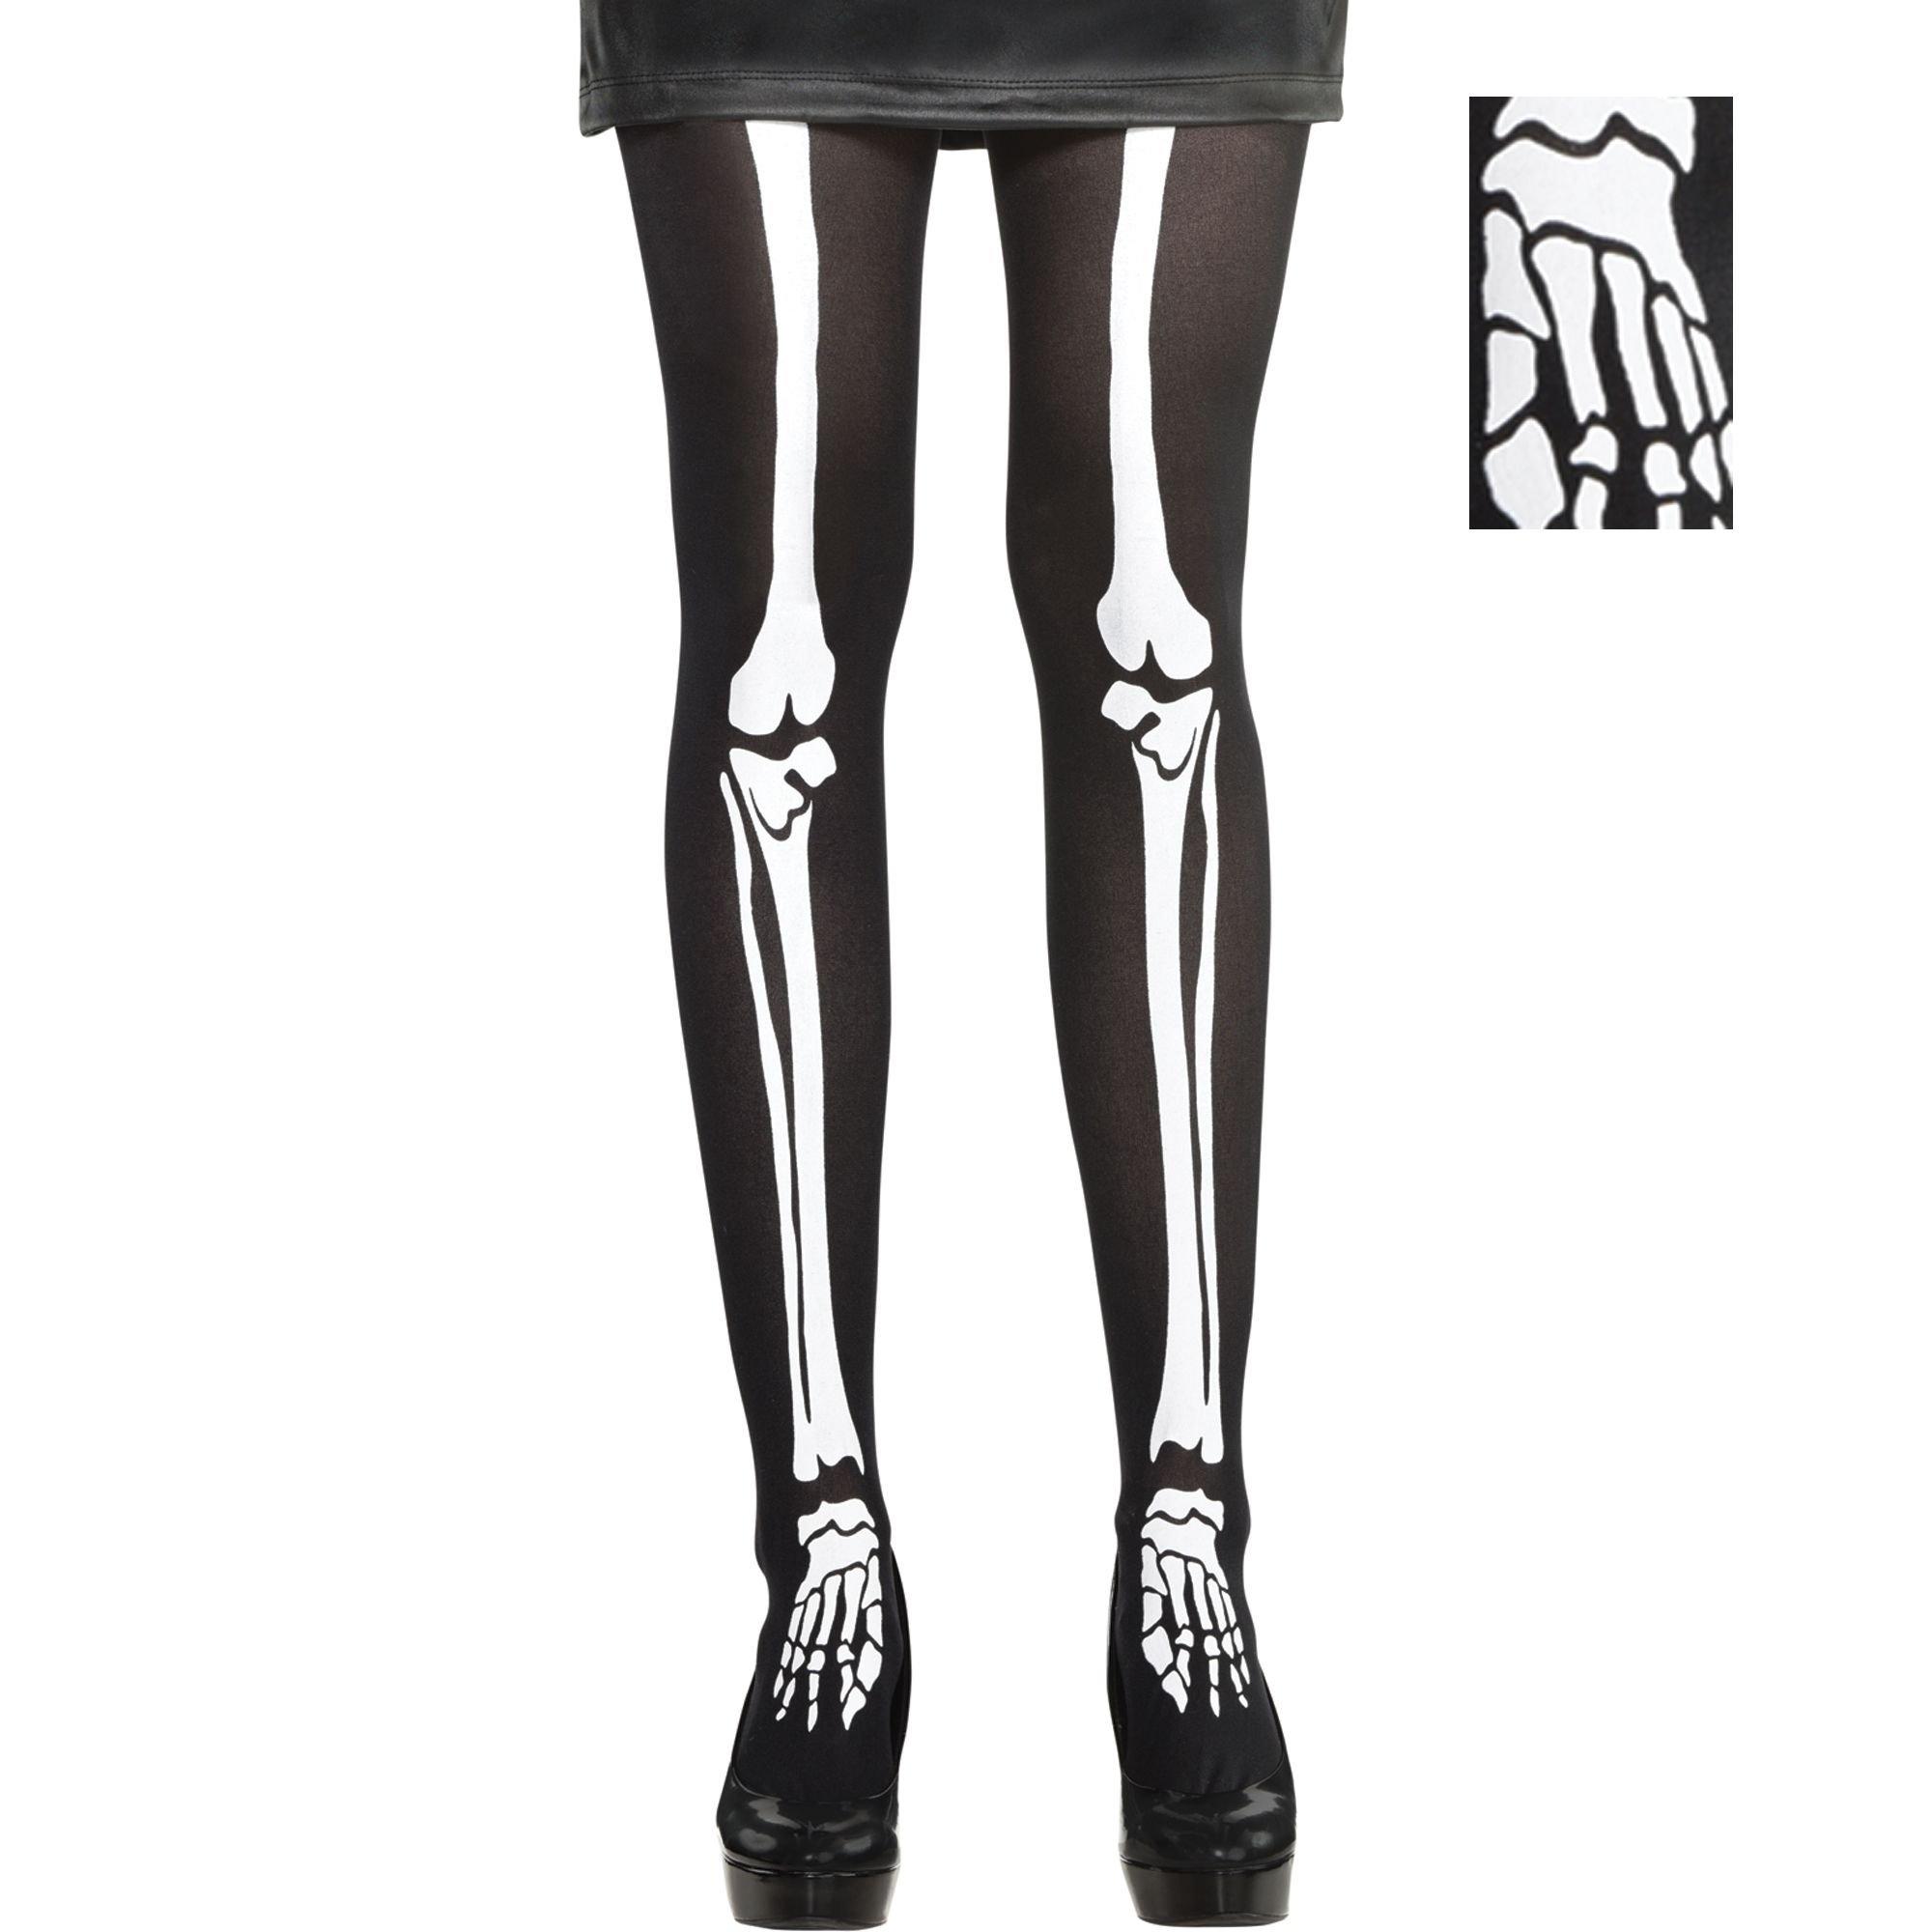 Halloween Black Skull Print Tights Stockings Sexy Women Pantyhose Leggings  for Cosplay Club Party Harajuku Style Accessories - AliExpress